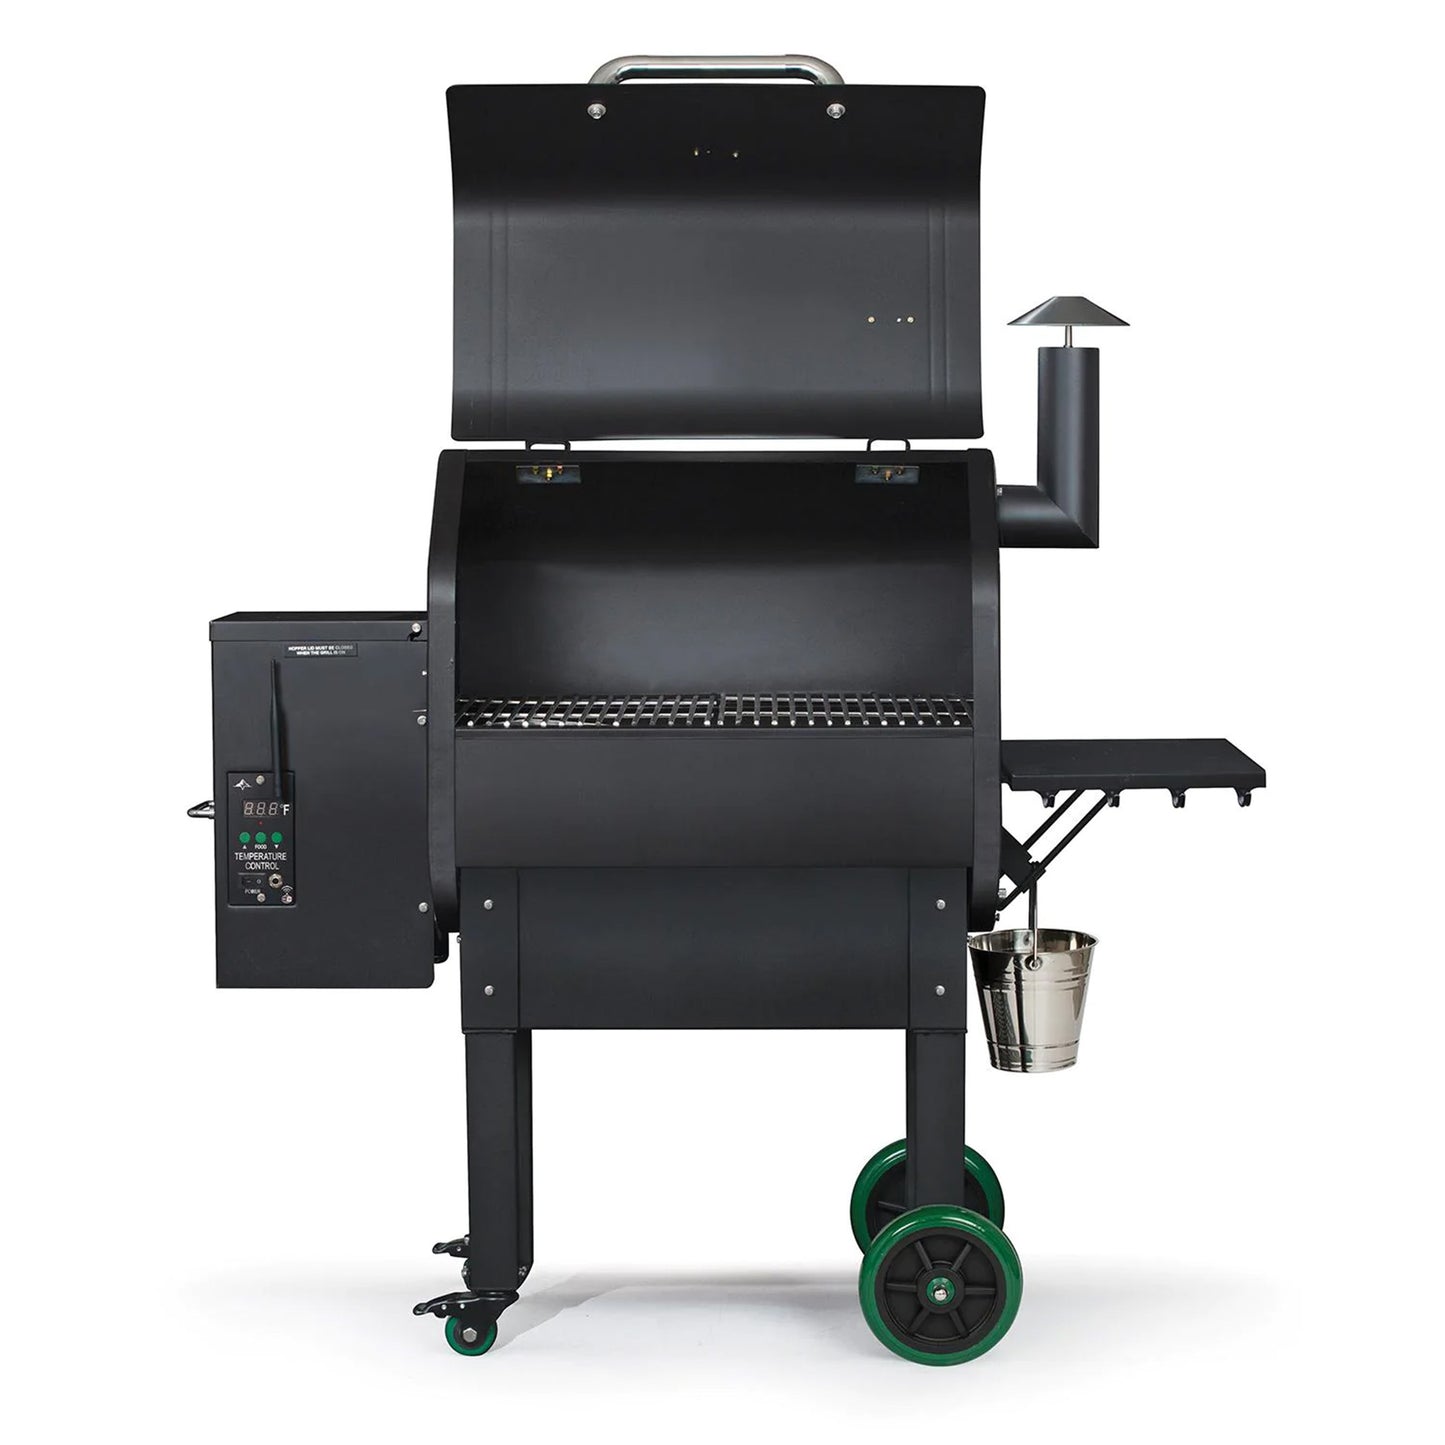 Green Mountain Grills Daniel Boone Prime Plus Pellet Grill with WiFi